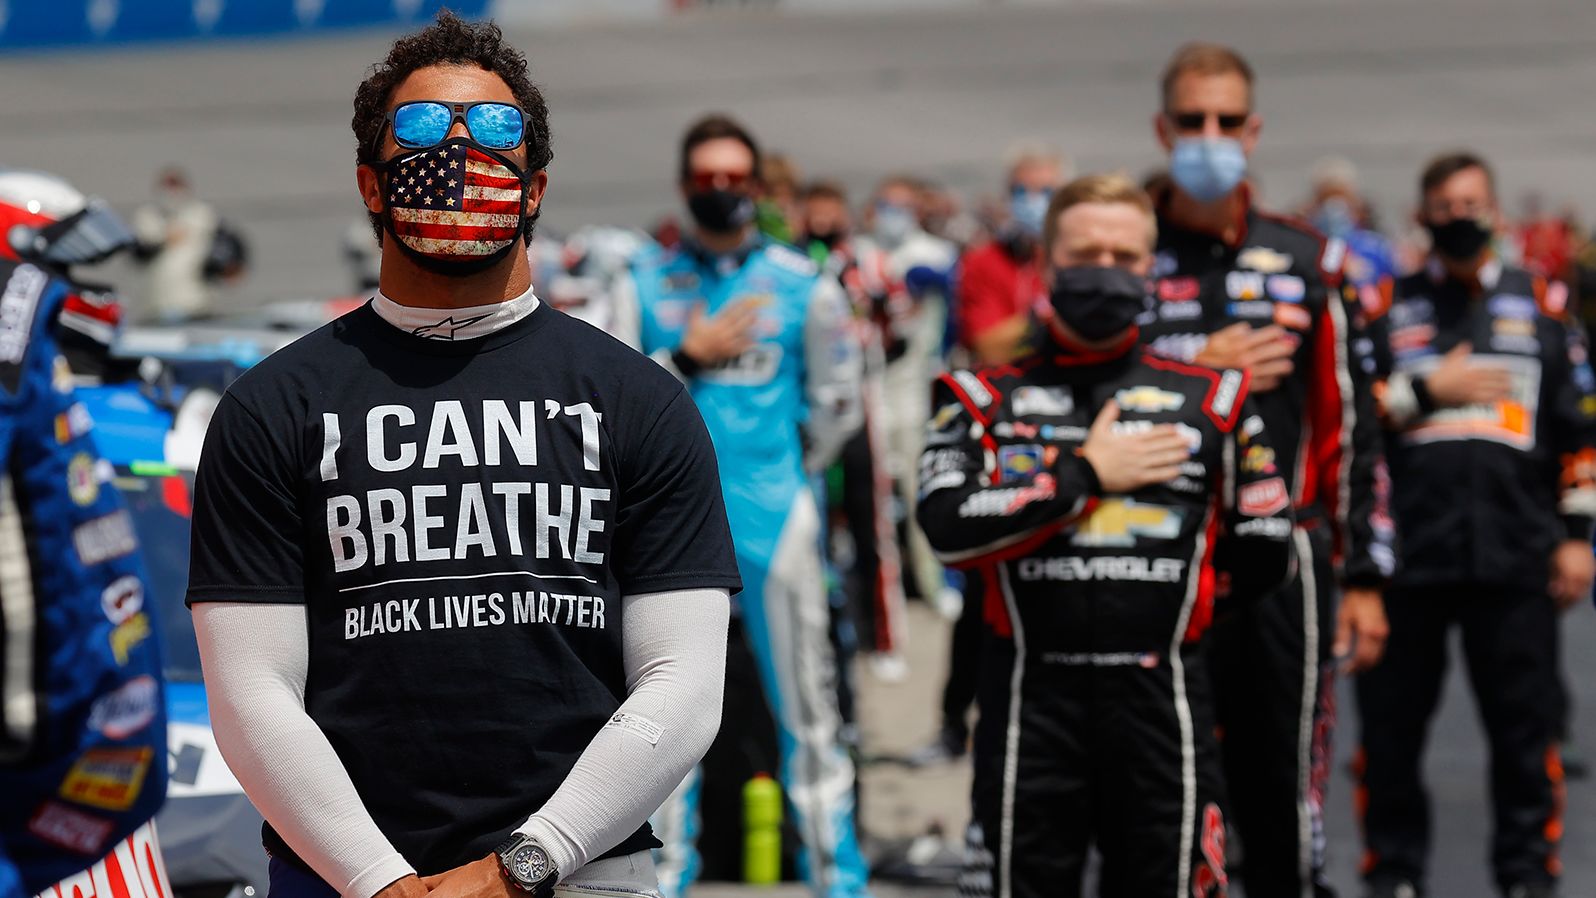 Bubba Wallace, driver of the #43 McDonald's Chevrolet, wears an "I Can't Breath - Black Lives Matter" T-shirt under his fire suit in solidarity at Atlanta Motor Speedway on June 7, 2020.